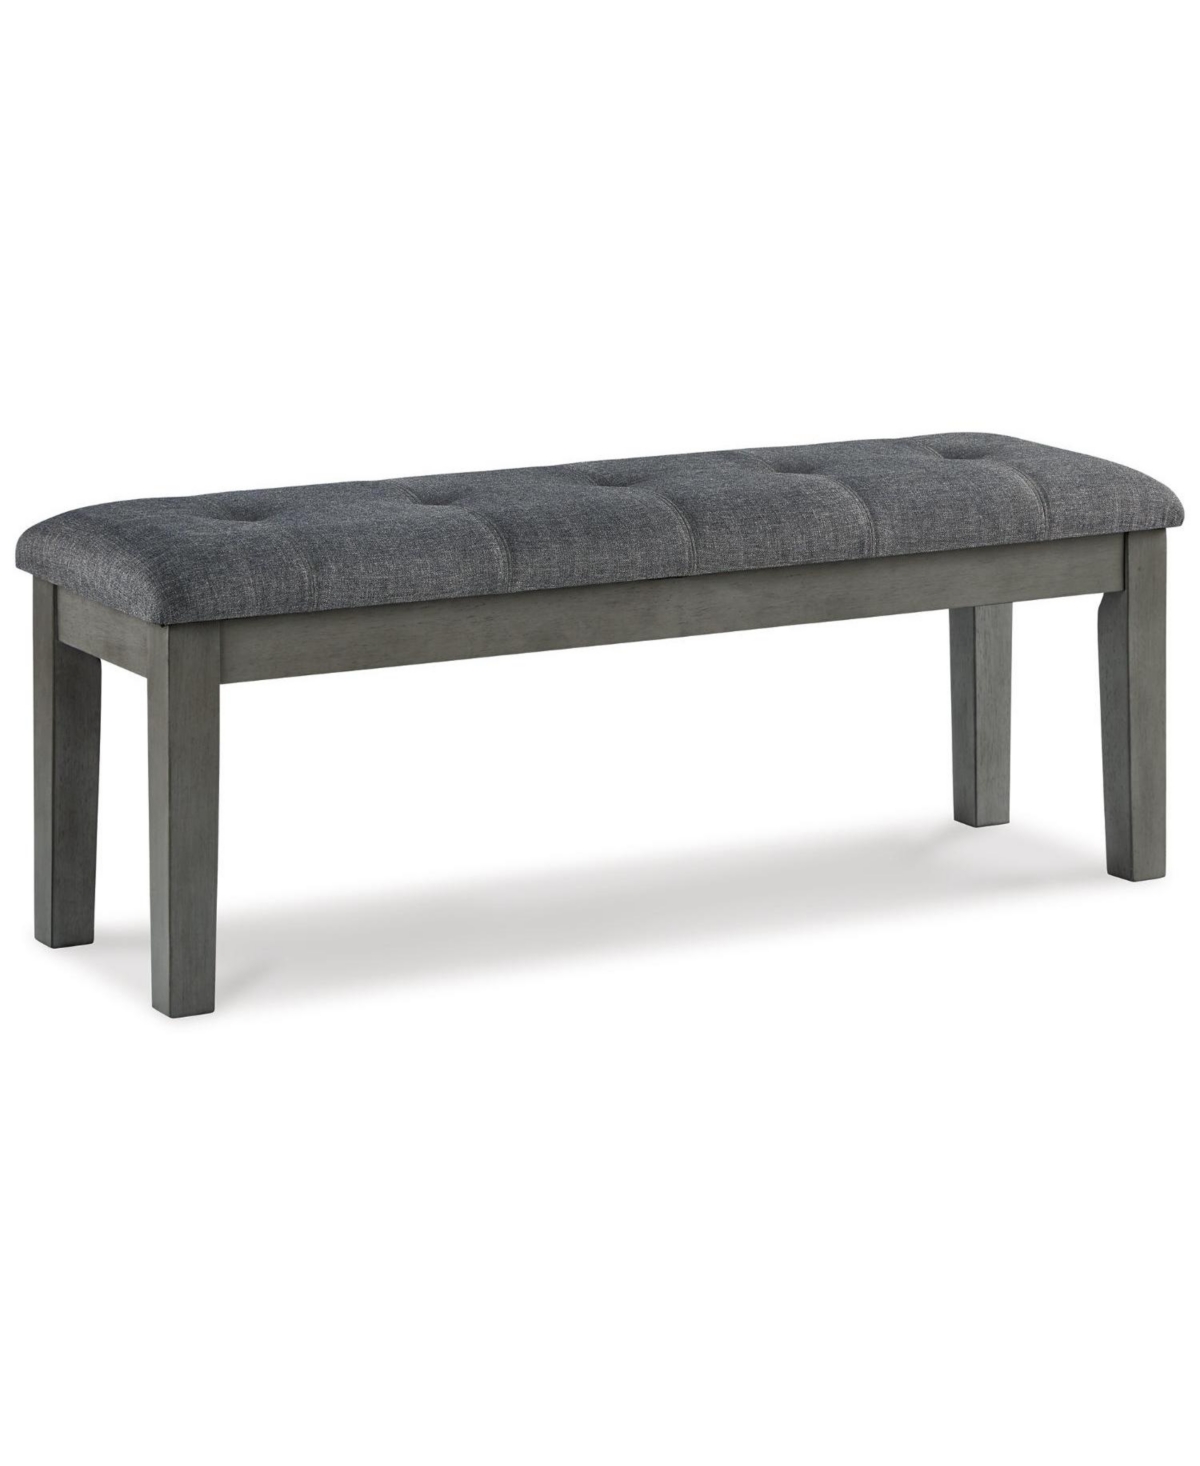 Signature Design By Ashley Hallanden Large Upholstery Dining Room Bench In Two-tone Gray